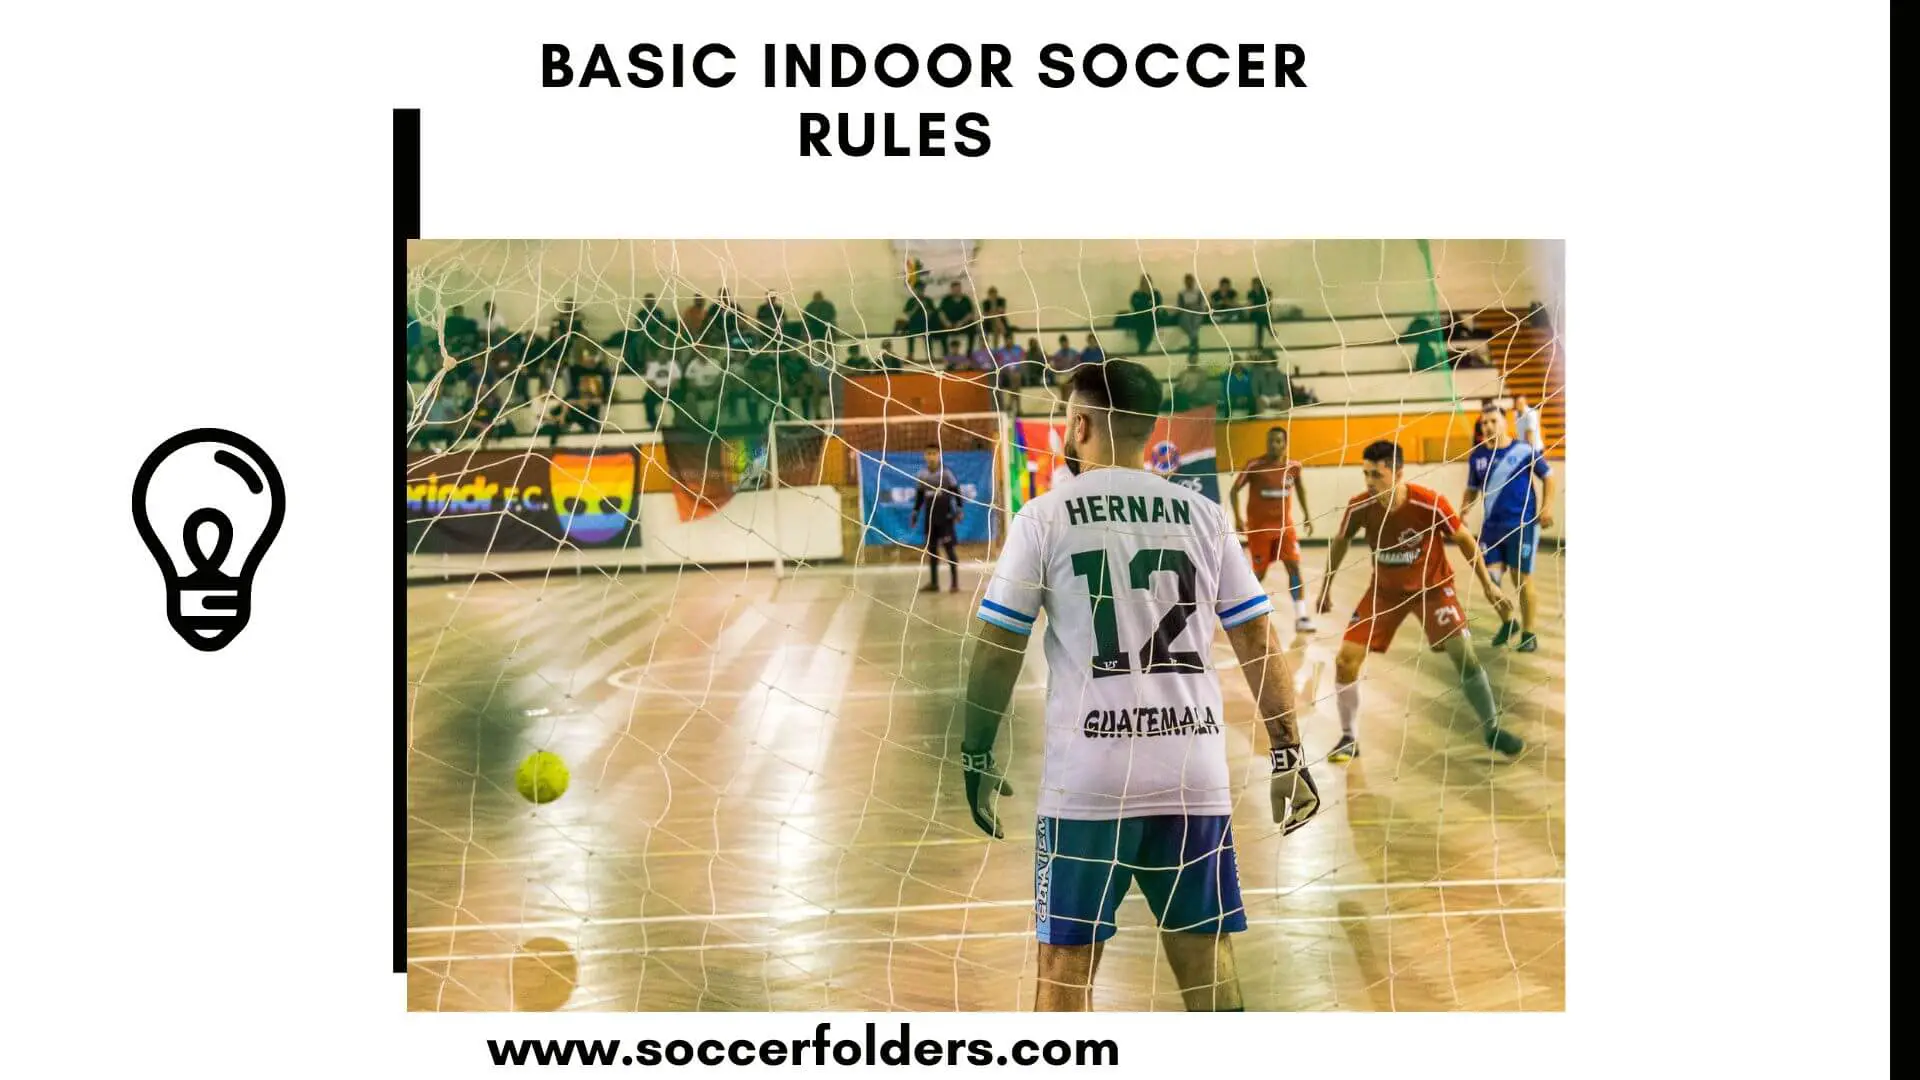 Basic indoor soccer rules - Featured image